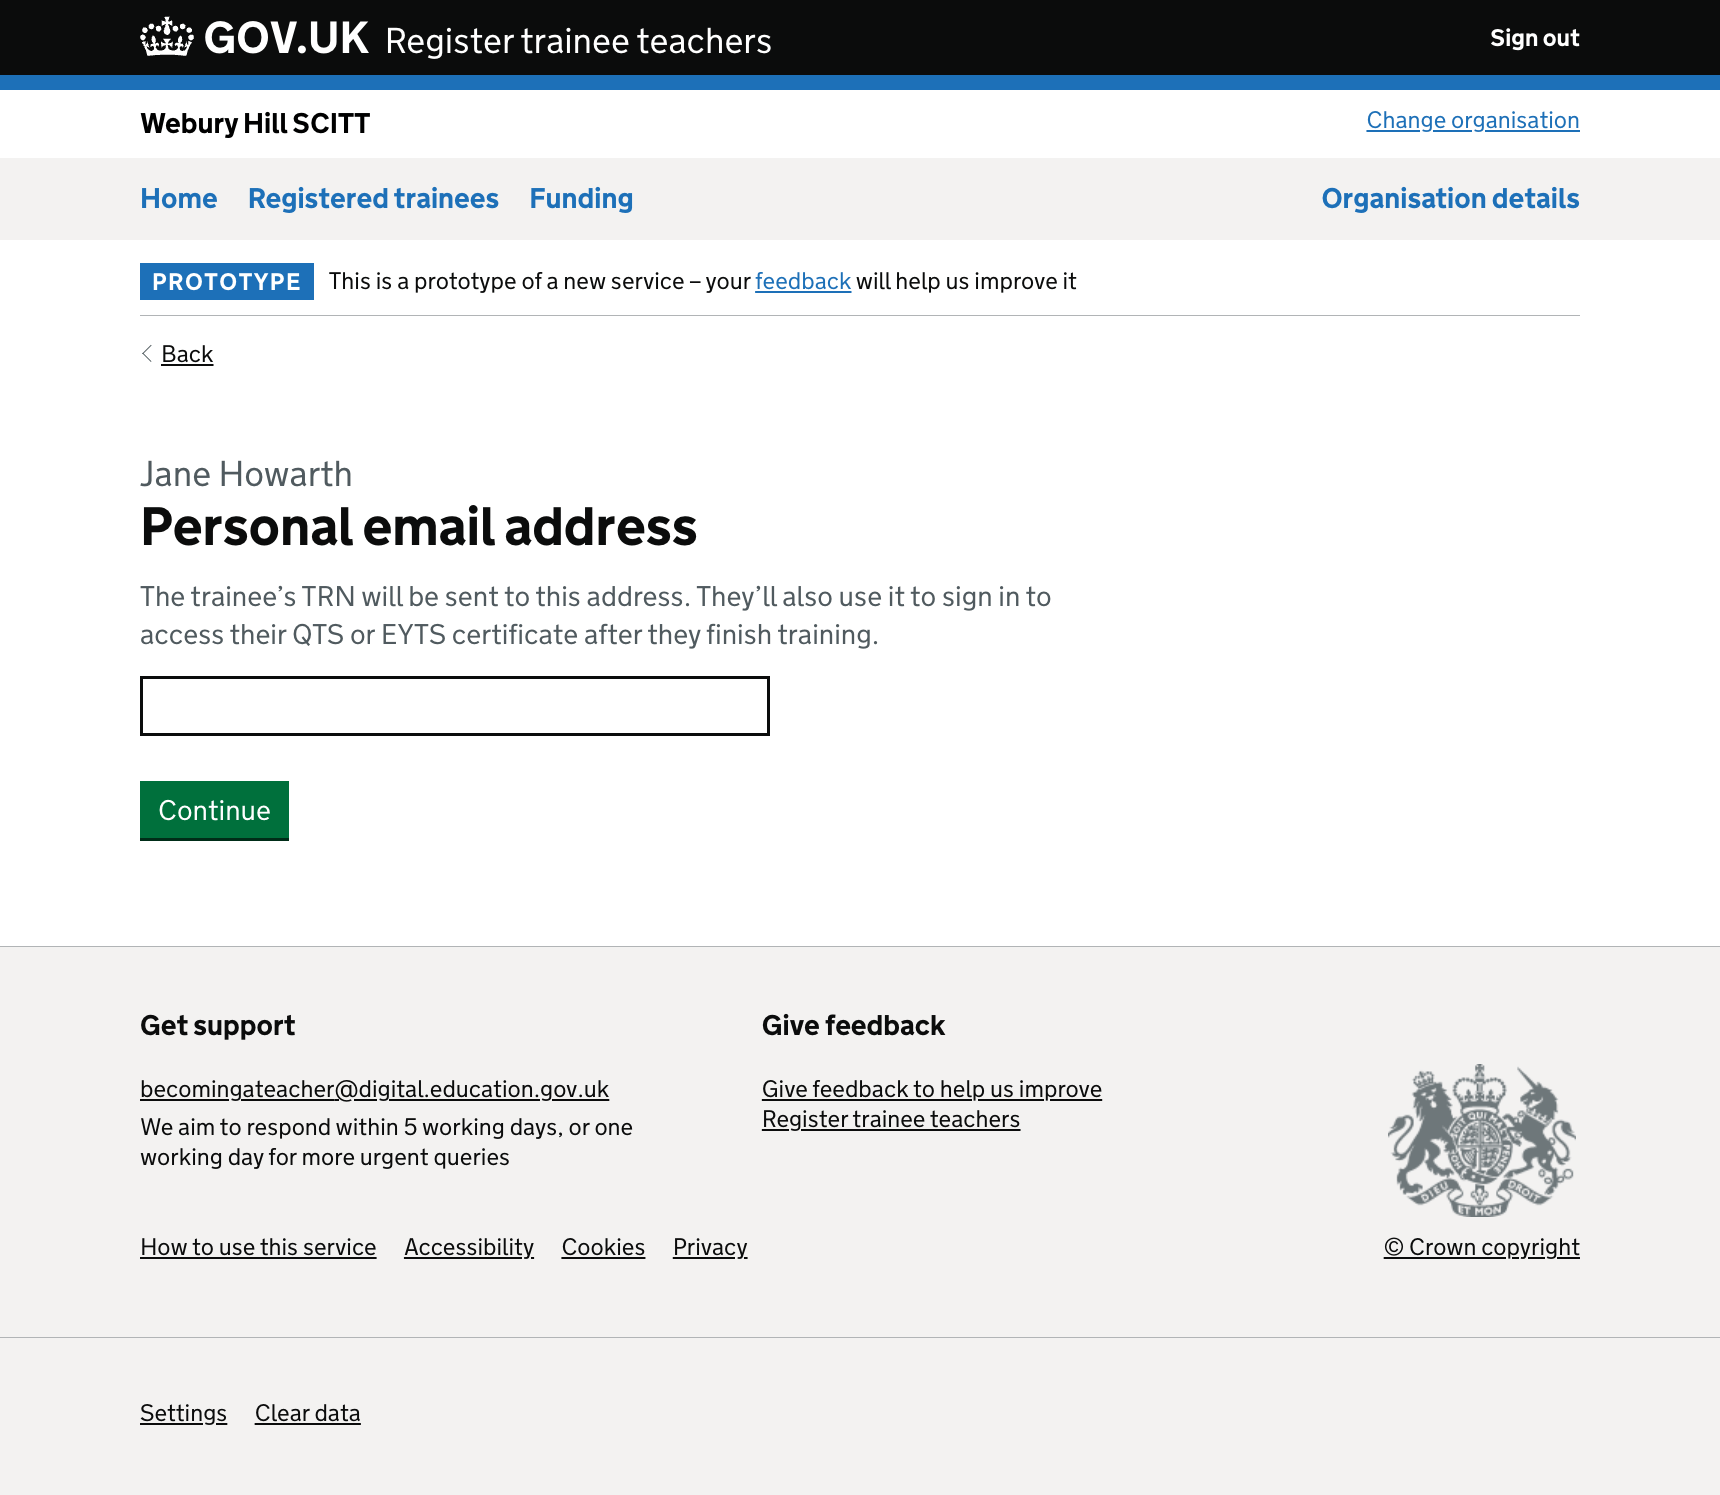 The personal email address question is on its own page. It has hint text which reads: “The trainee’s TRN will be sent to this address. They’ll also use it to sign in to access their QTS or EYTS certificate after they finish training.”